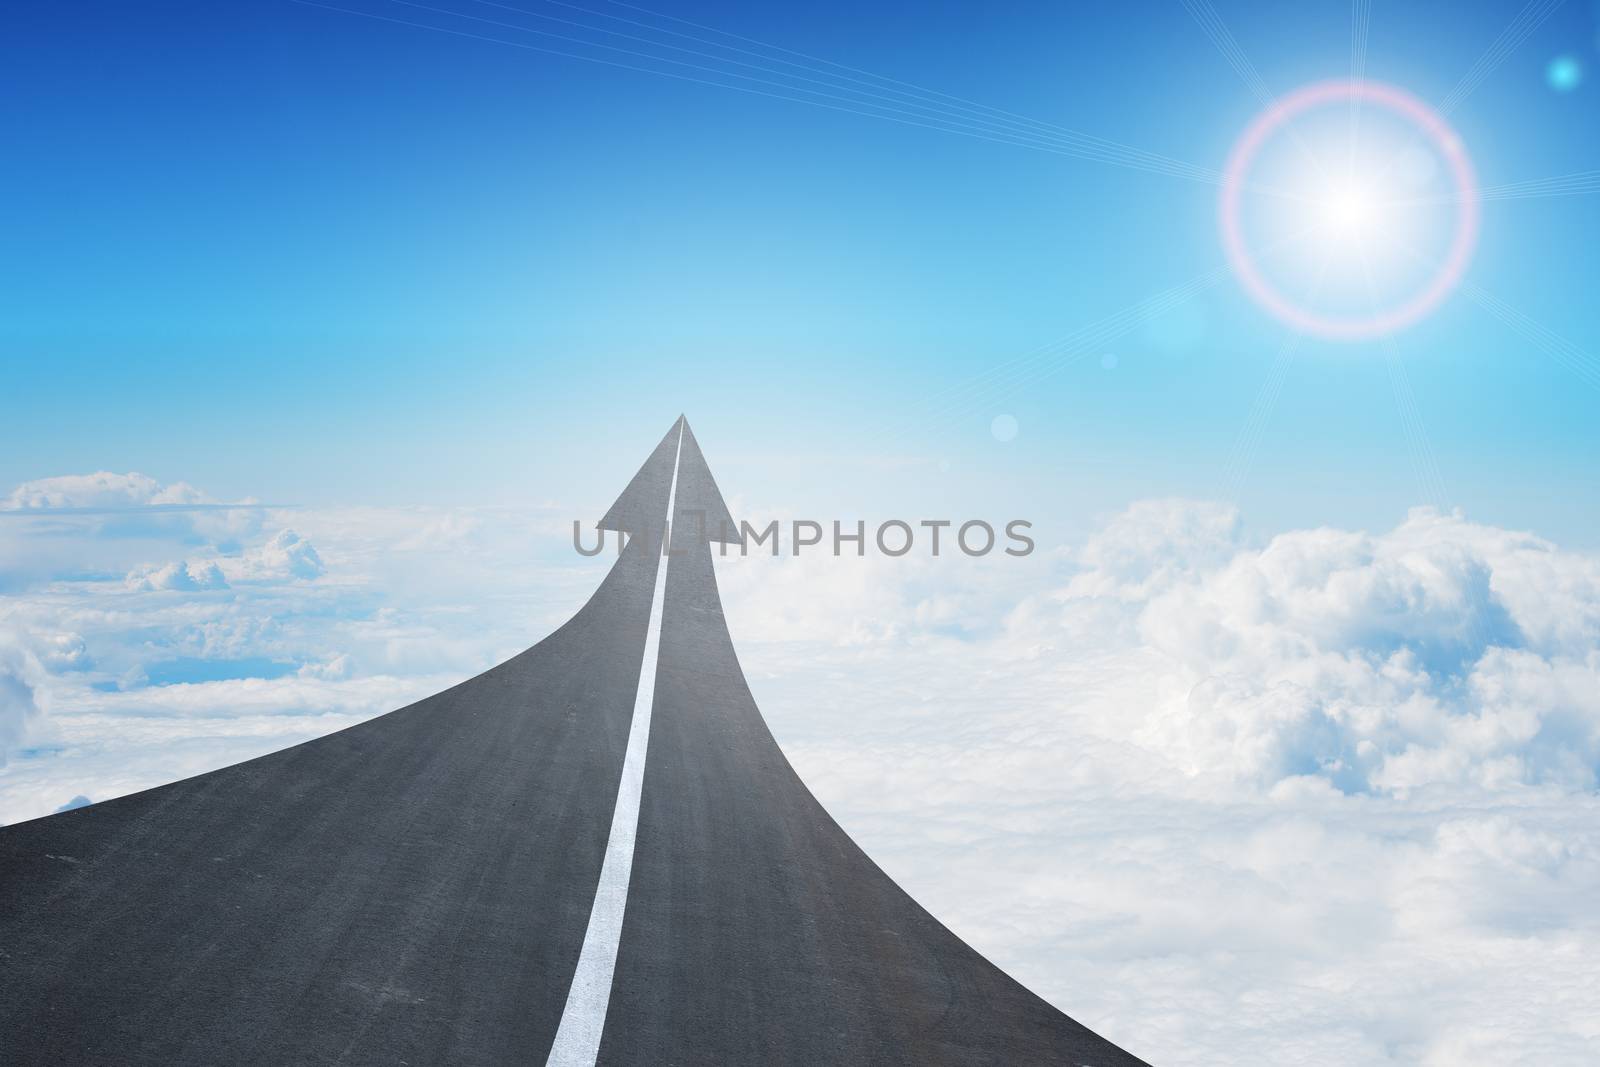 Highway road going up as an arrow in sky